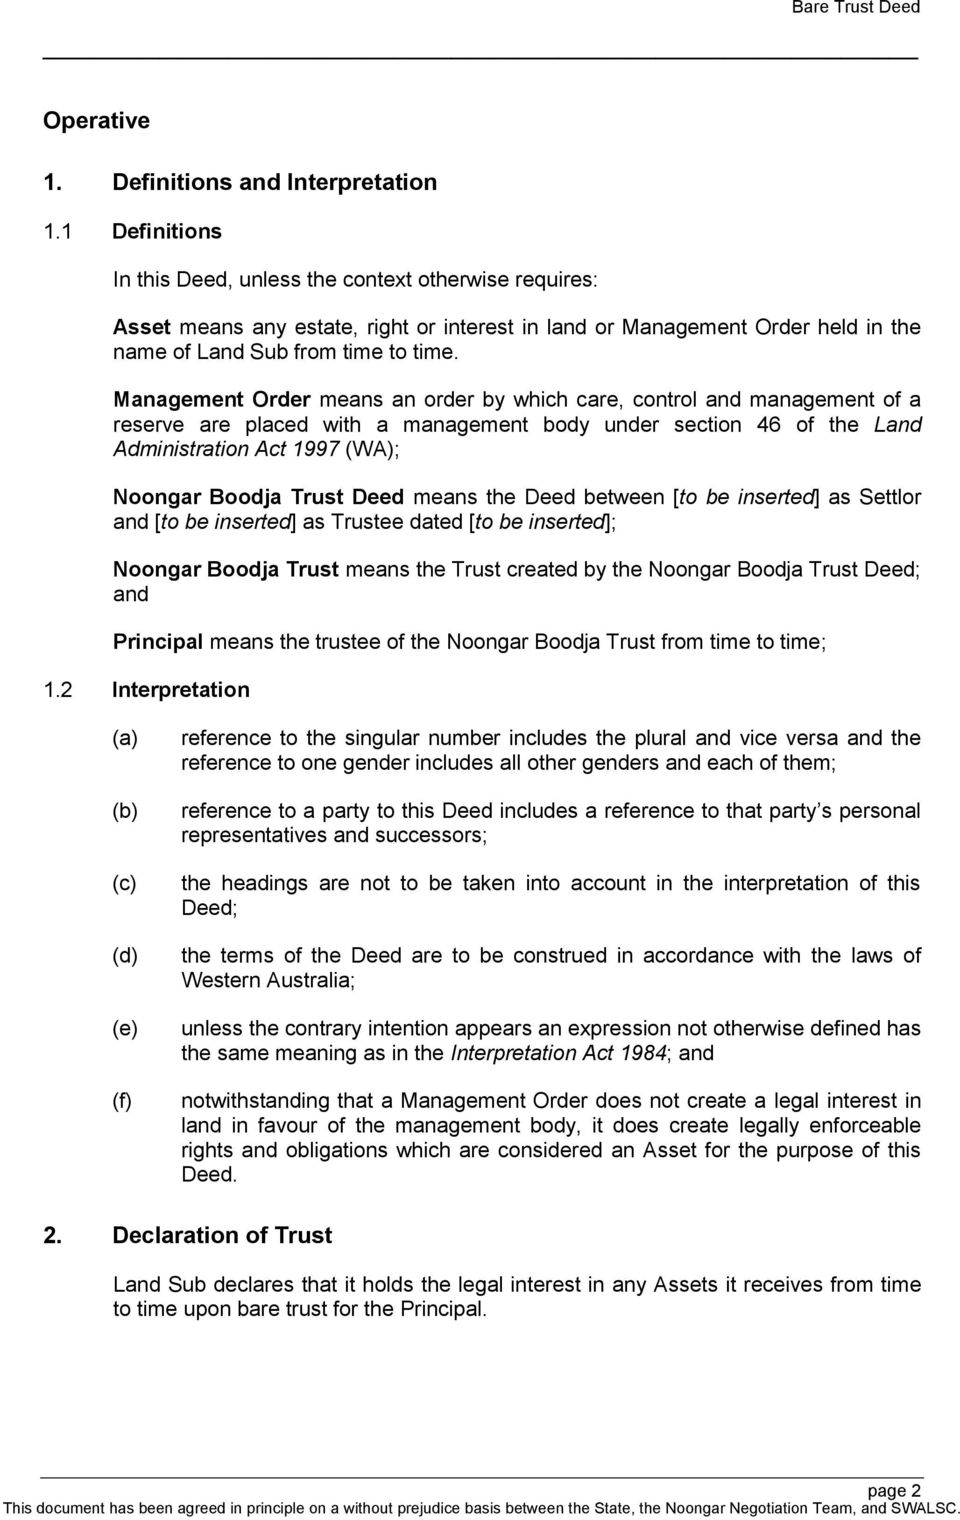 Management Order means an order by which care, control and management of a reserve are placed with a management body under section 46 of the Land Administration Act 1997 (WA); Noongar Boodja Trust